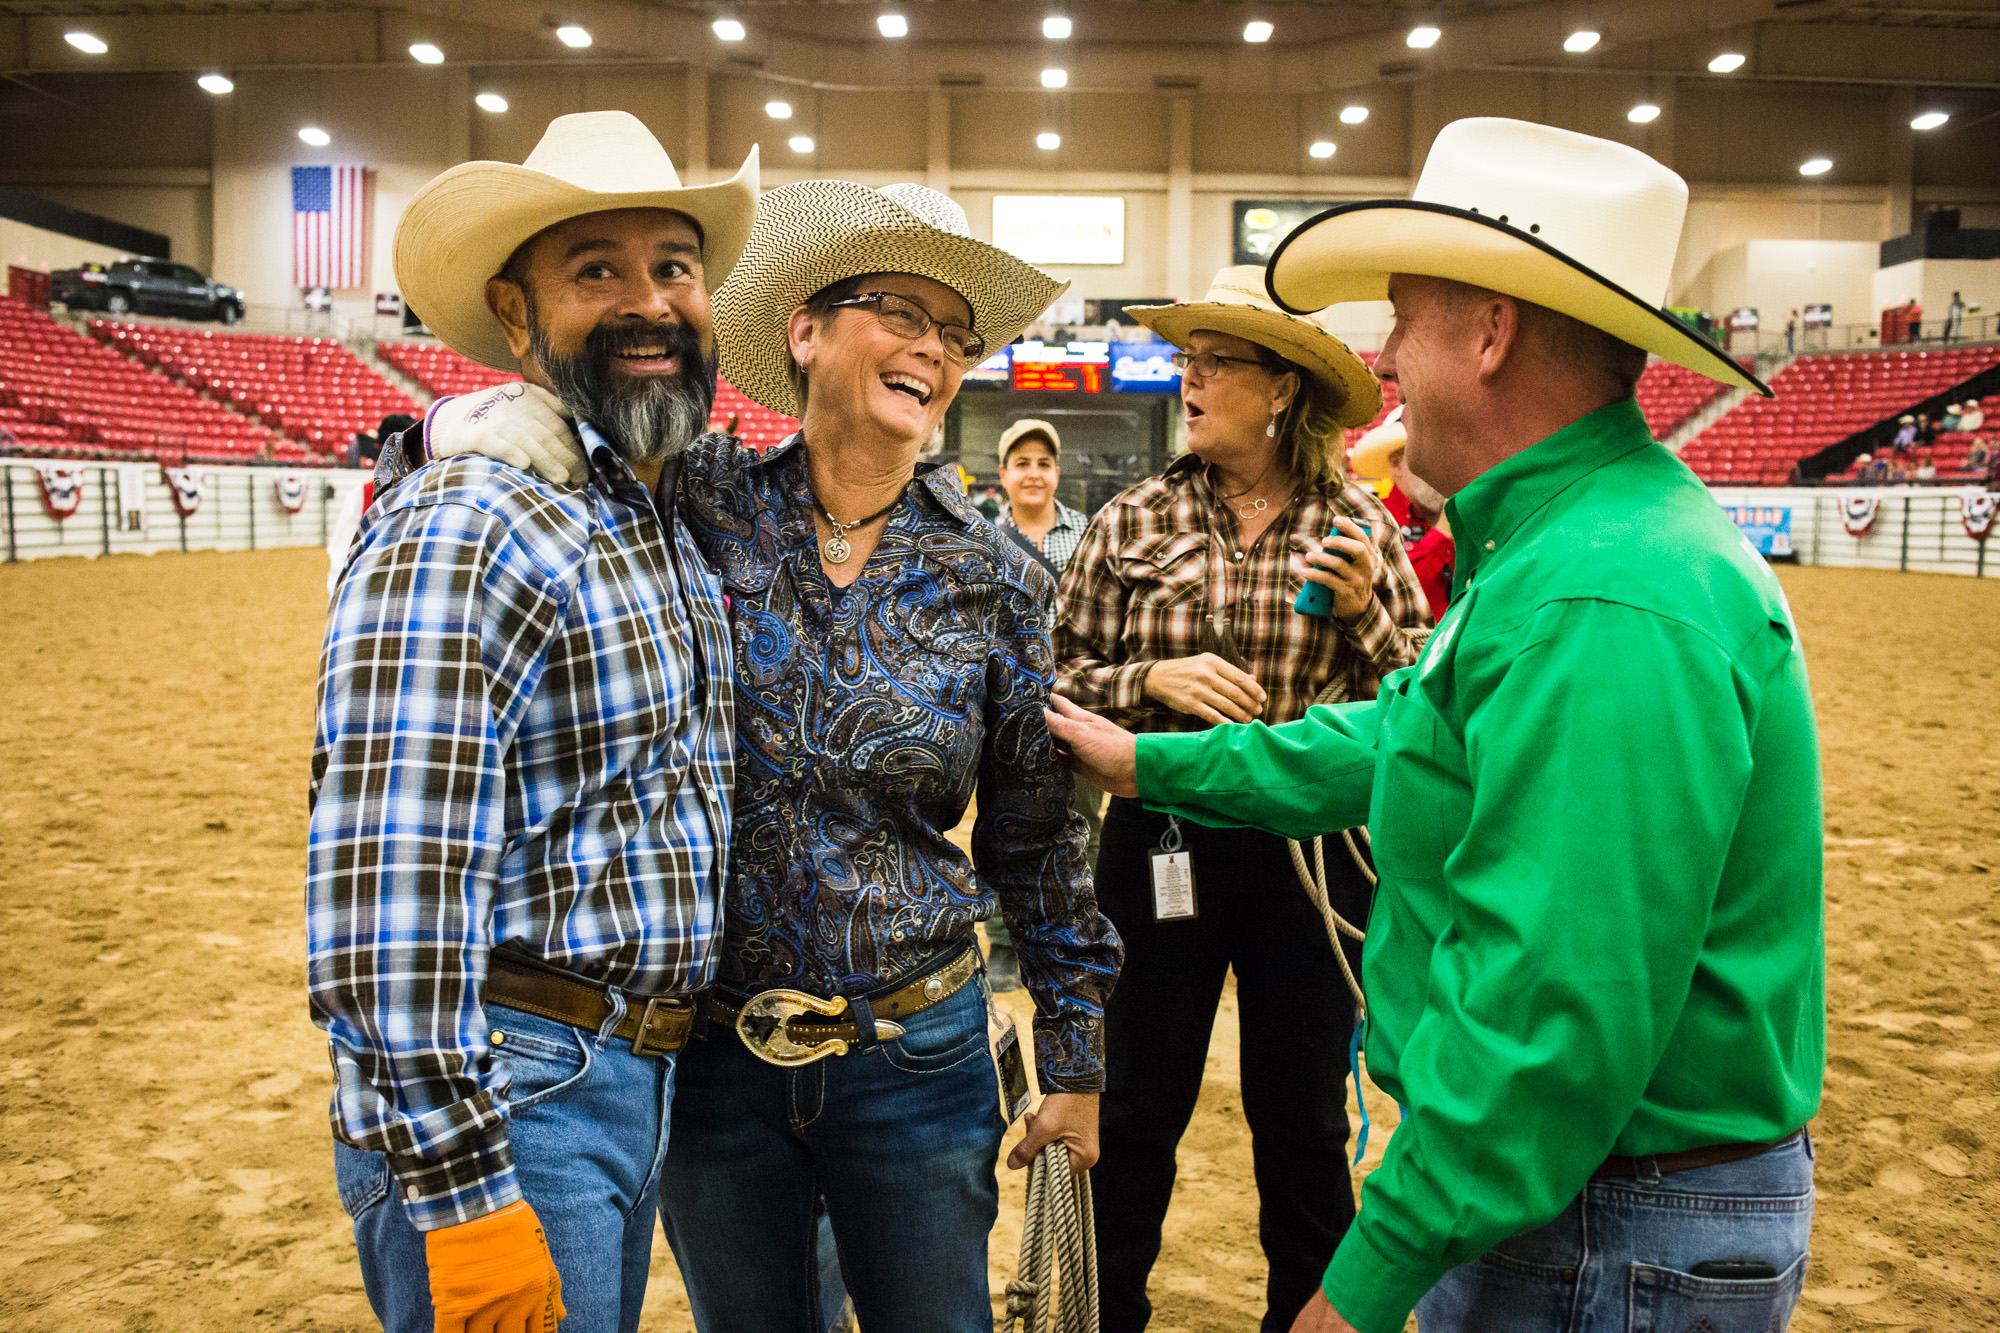  Deb Freeman of Morgan Hill, CA, is congratulated by friends after successfully roping her calf during the World Gay Rodeo Finals in Las Vegas, NV. 